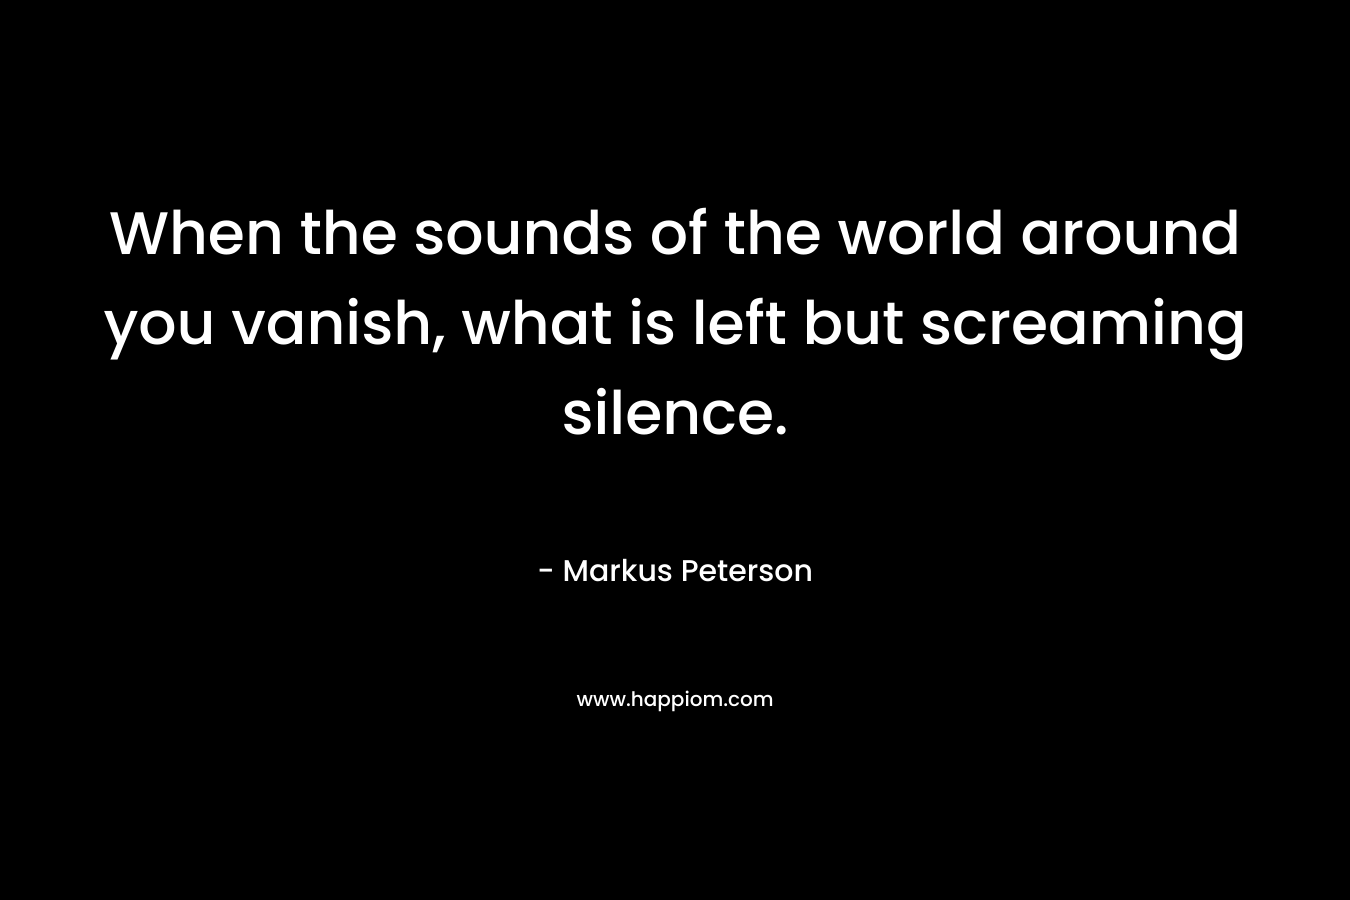 When the sounds of the world around you vanish, what is left but screaming silence. – Markus Peterson